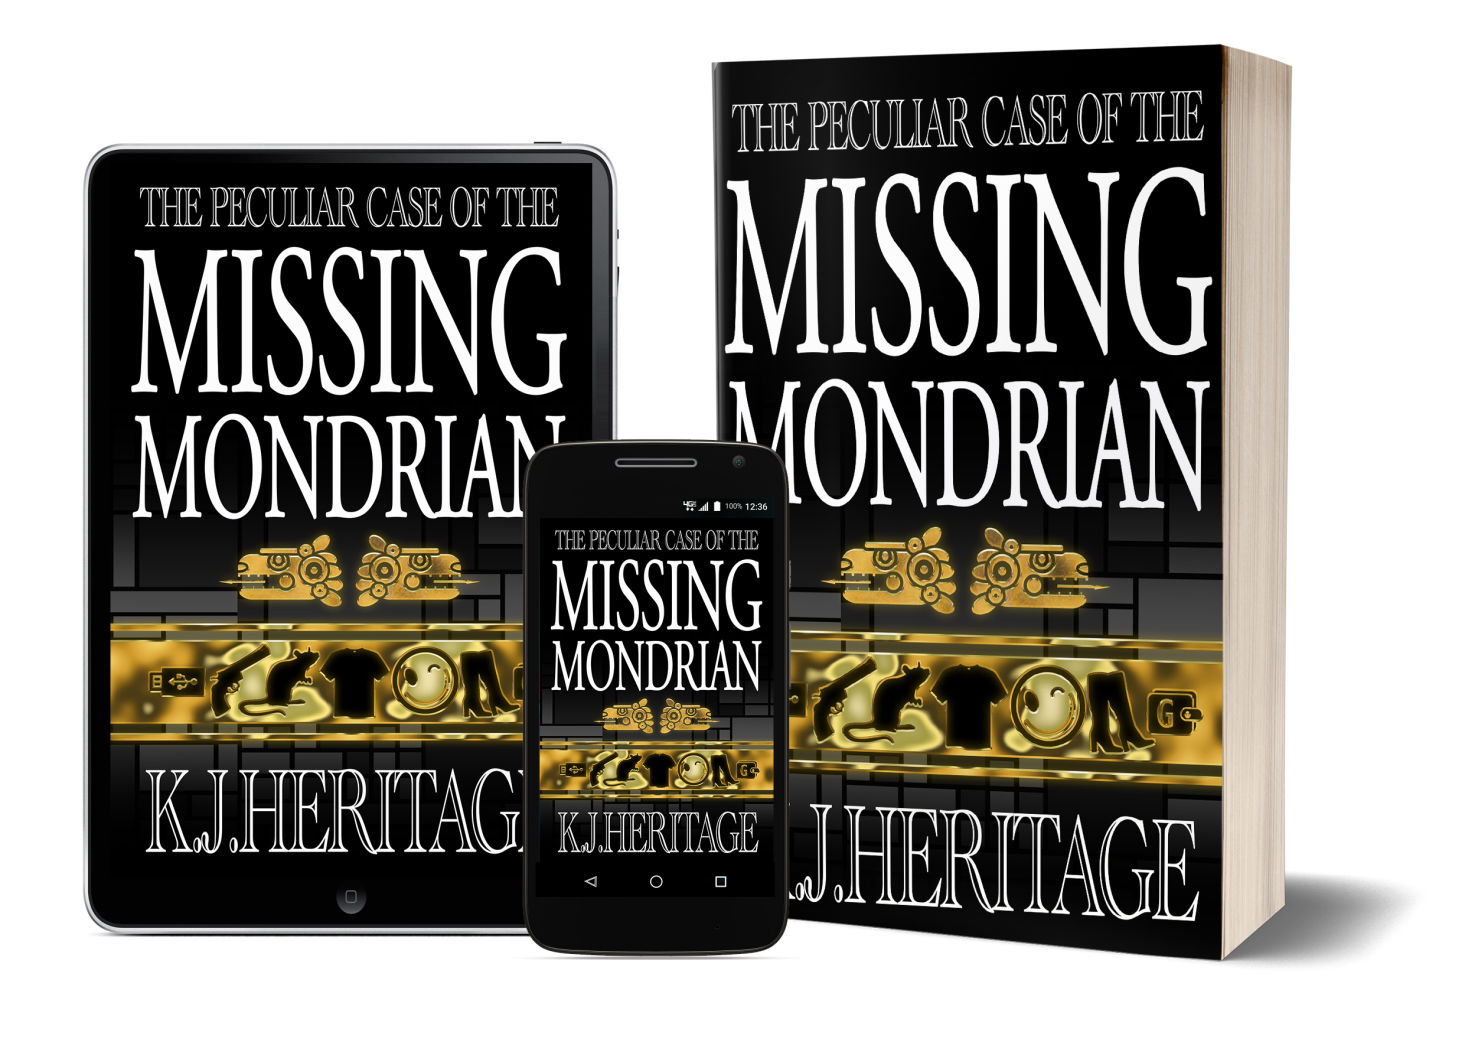 The Case of the Missing Mondrian by K.J.Heritage